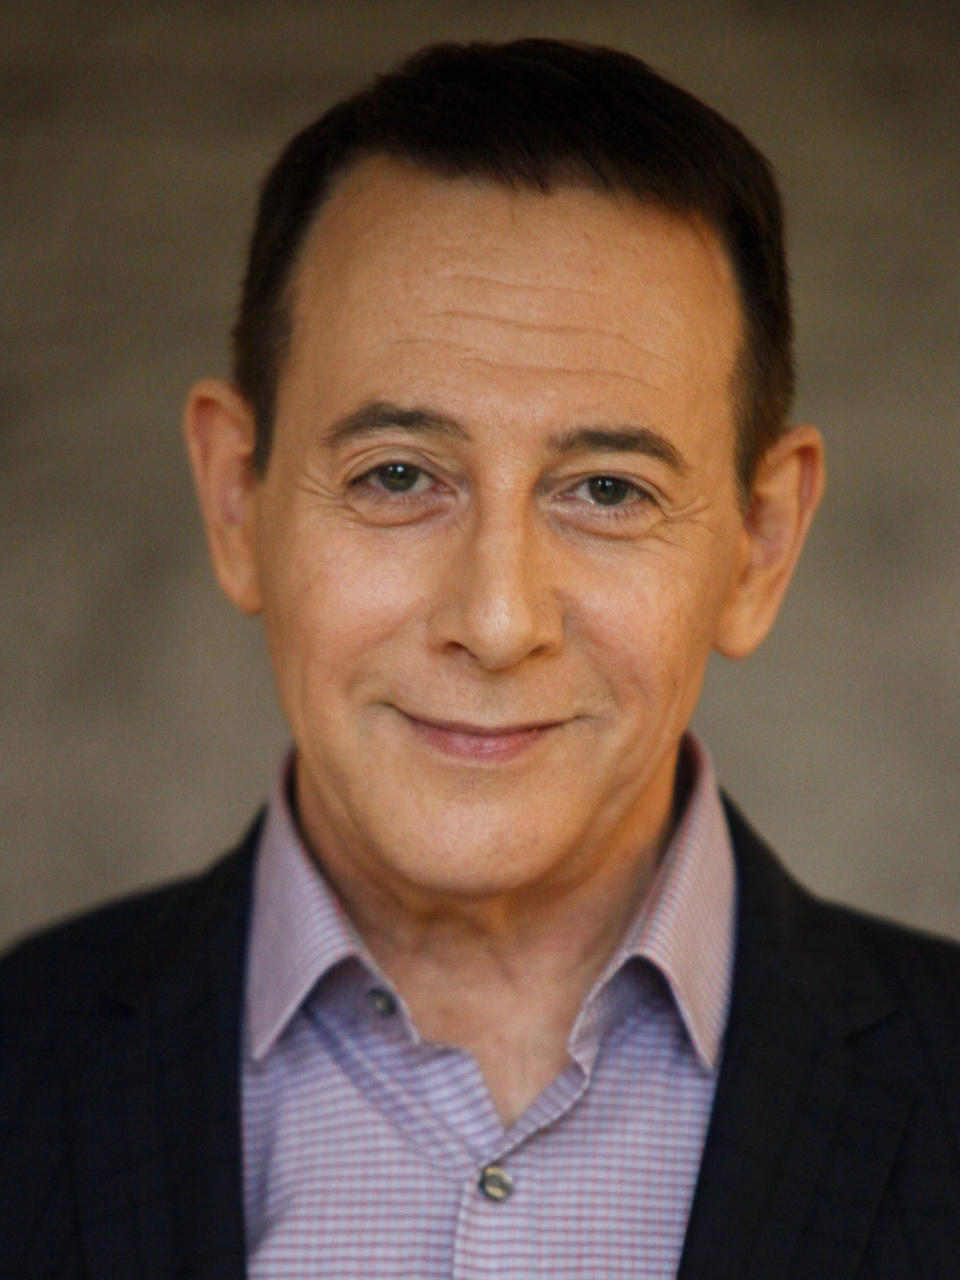 FILE - Actor Paul Reubens participates in AOL's BUILD Speaker Series to discuss his new film, "Pee-wee's Big Holiday", at AOL Studios on Friday, March 25, 2016, in New York. Reubens died Sunday night after a six-year struggle with cancer that he did not make public, his publicist said in a statement. (Photo by Andy Kropa/Invision/AP, File)